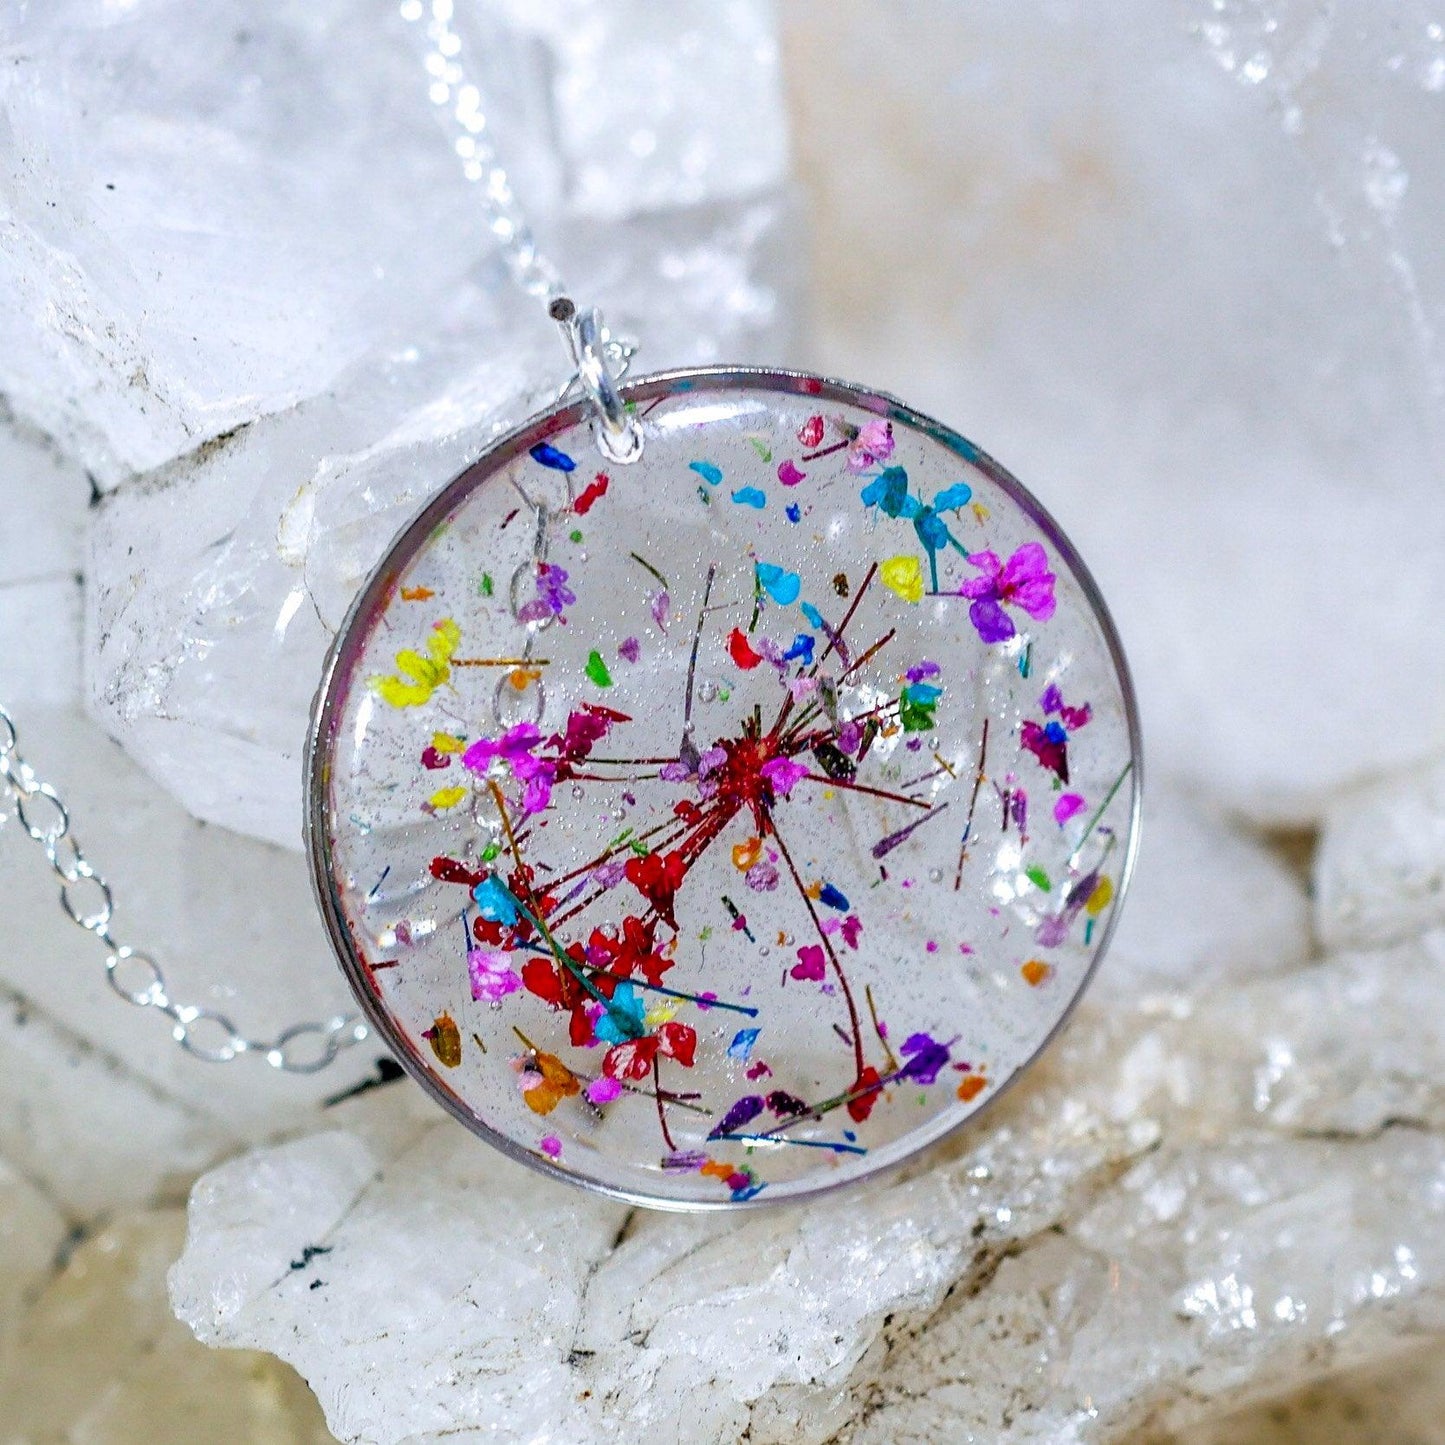 How to Make Resin Jewelry with Flowers - Super Crafty Gal